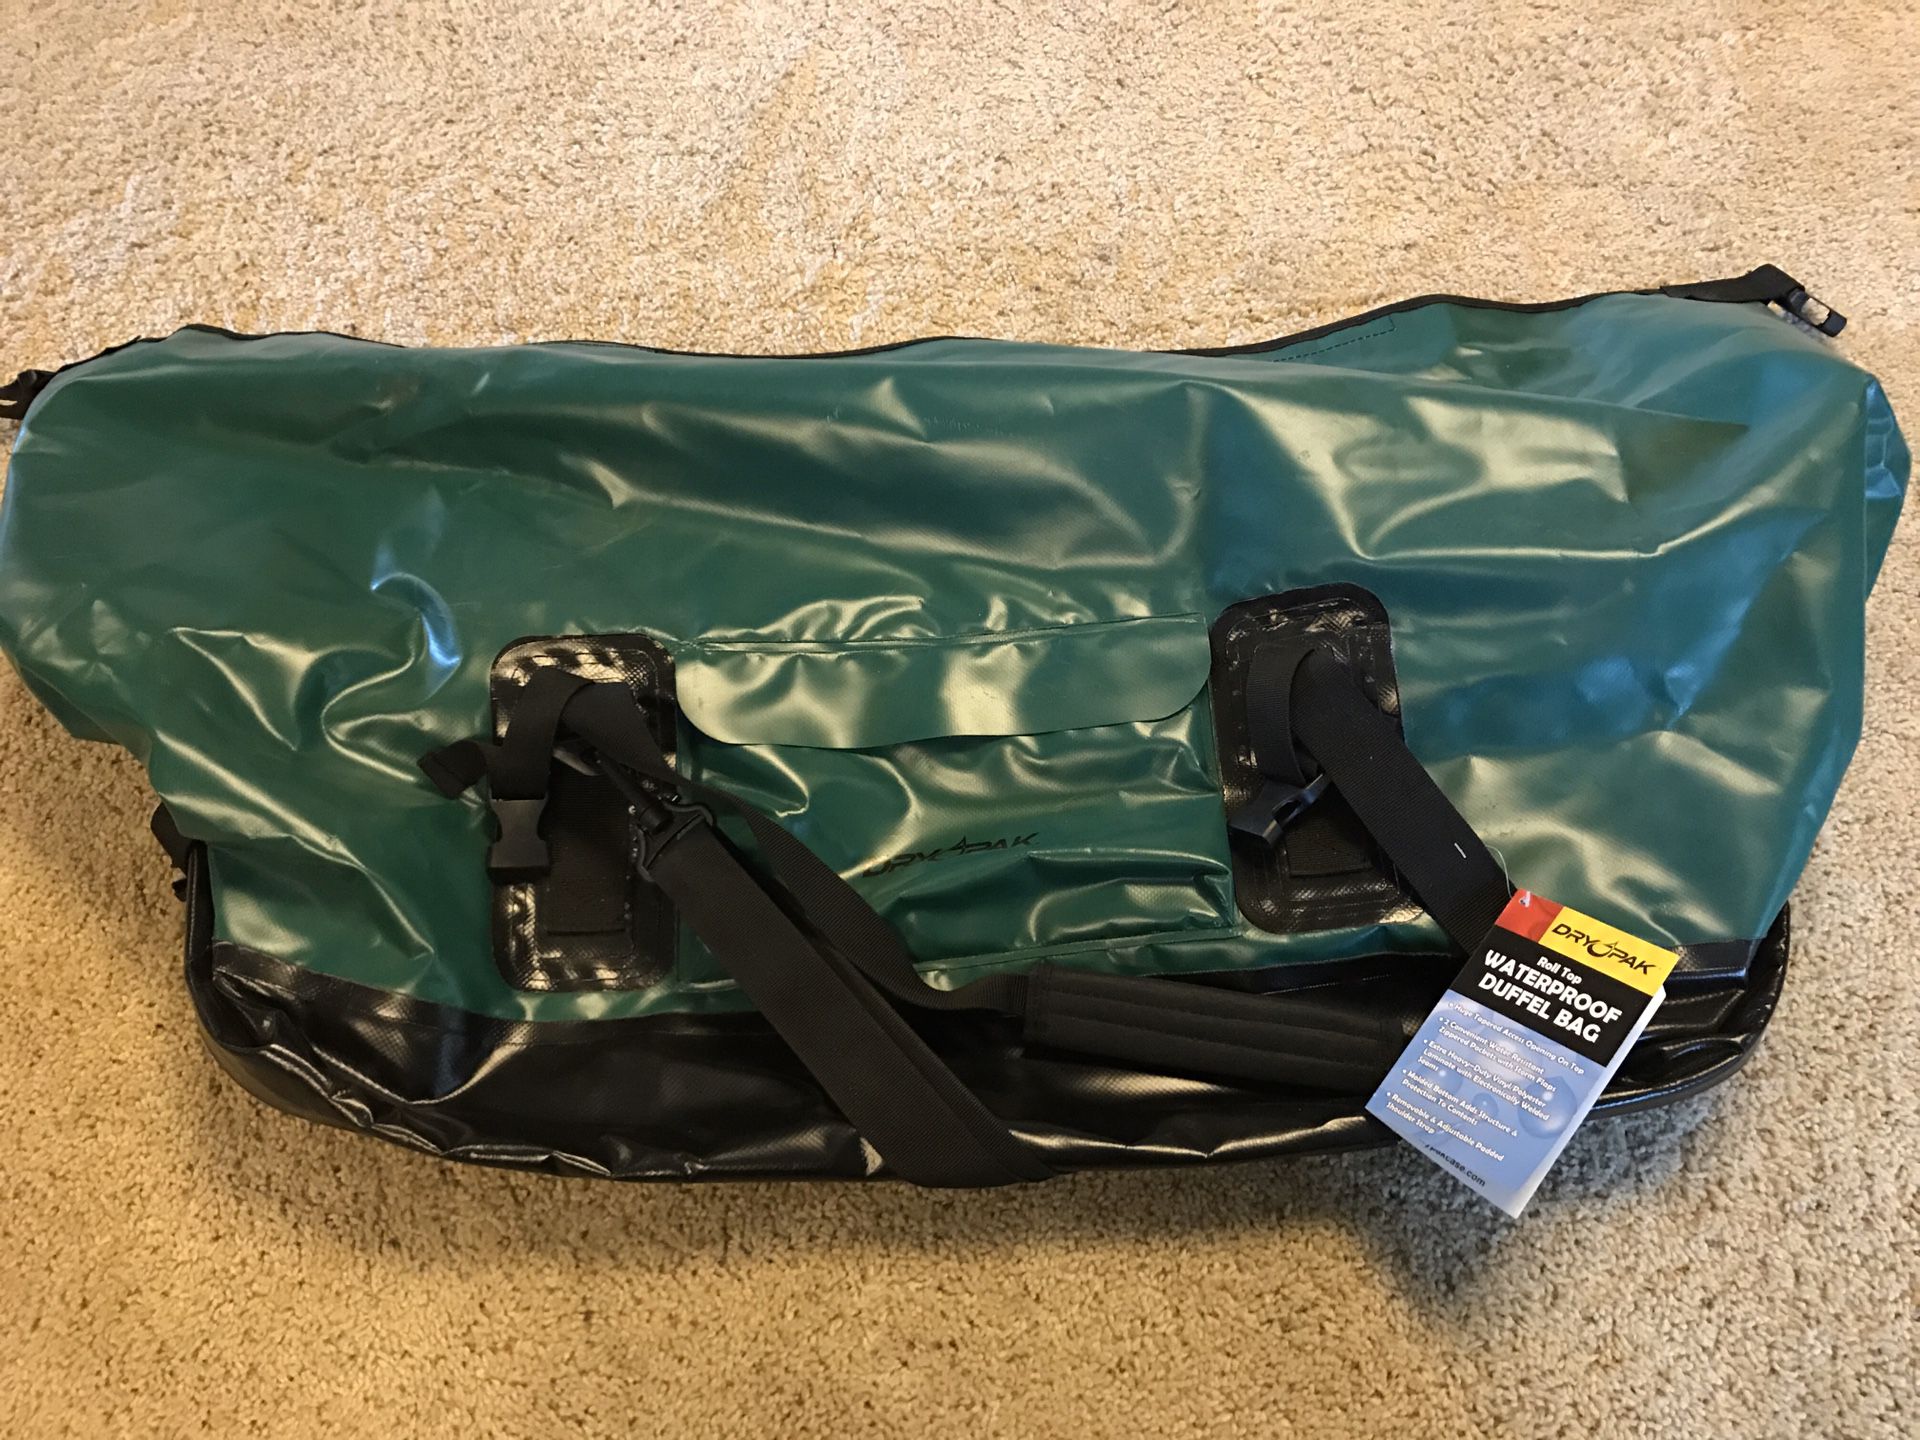 Dry bag brand new, never used w tags.